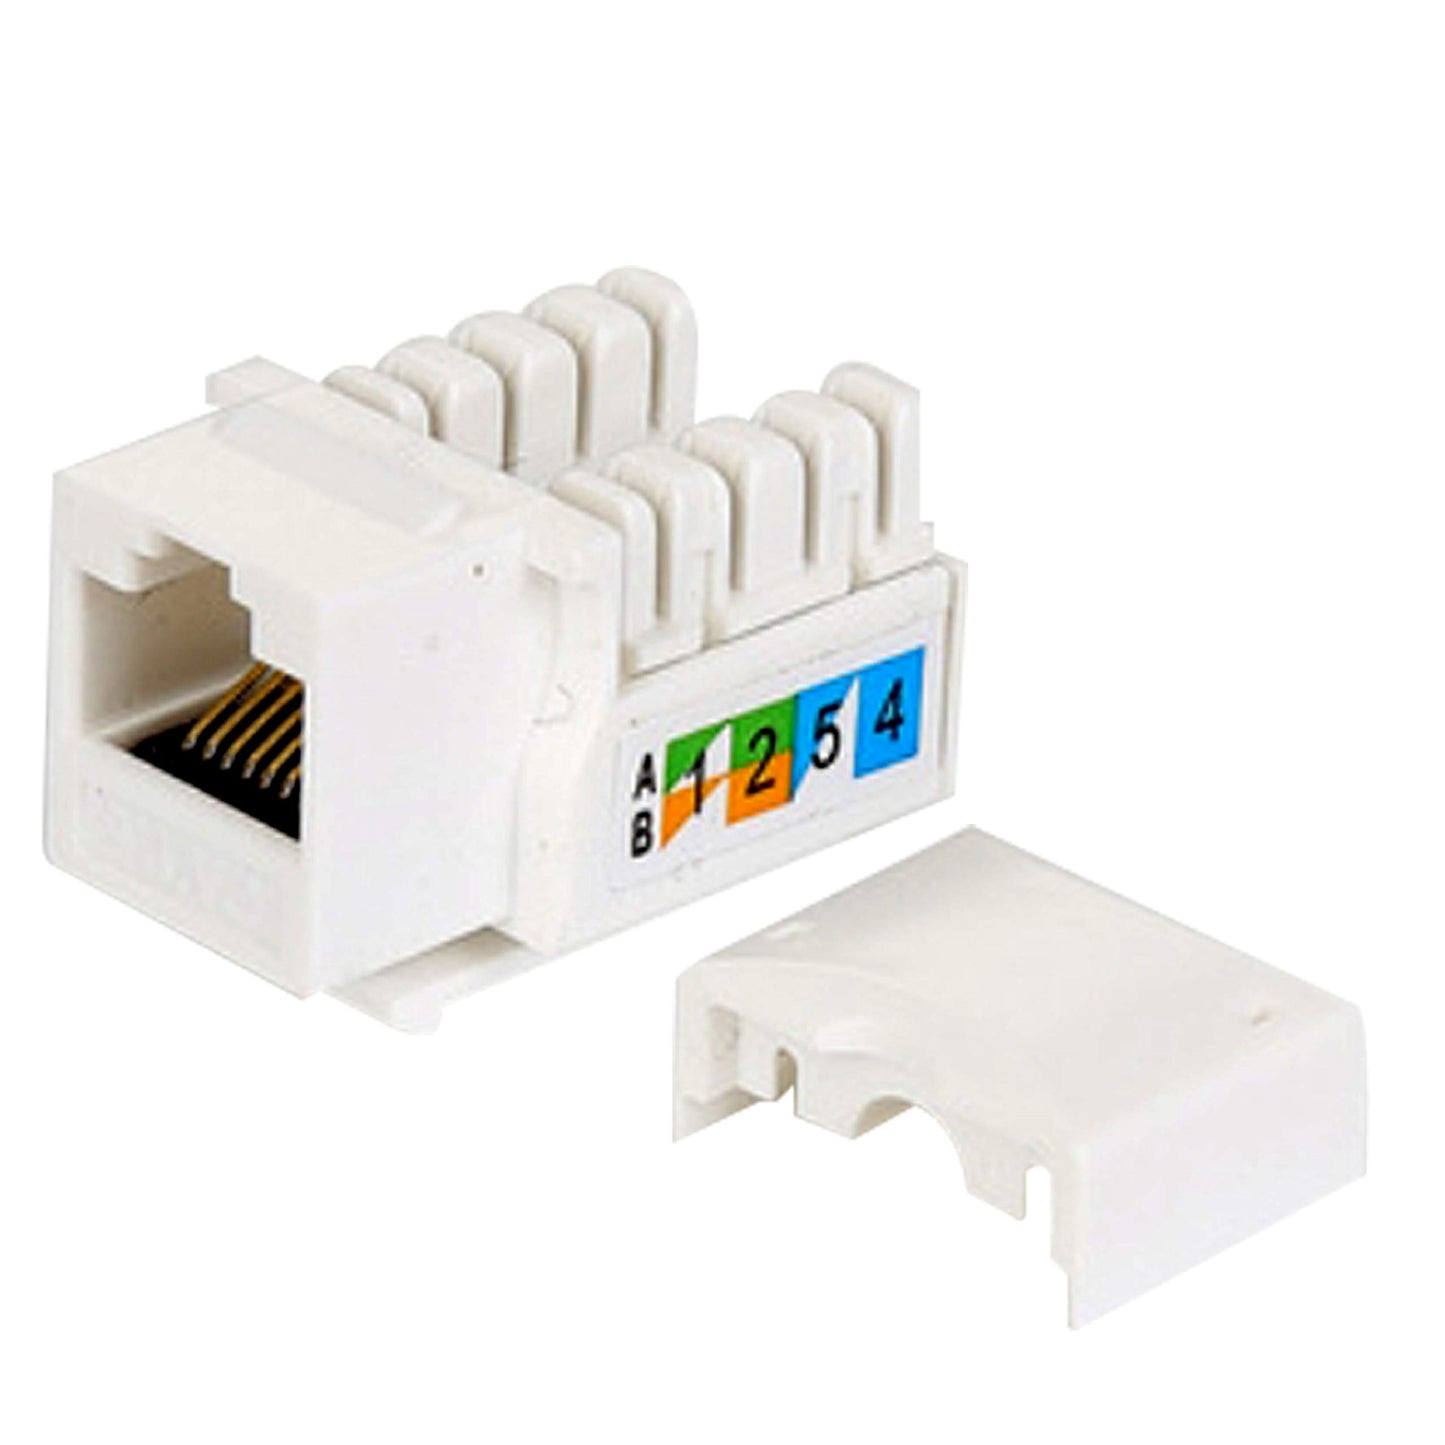 (50-Pack) Cat6 Keystone Jack - [UL Listed] - Ethernet Wall Jack - Wall Cat6 - Cat6 Network Coupler - Keystone Jack - Cat5/5e/6 Compatible